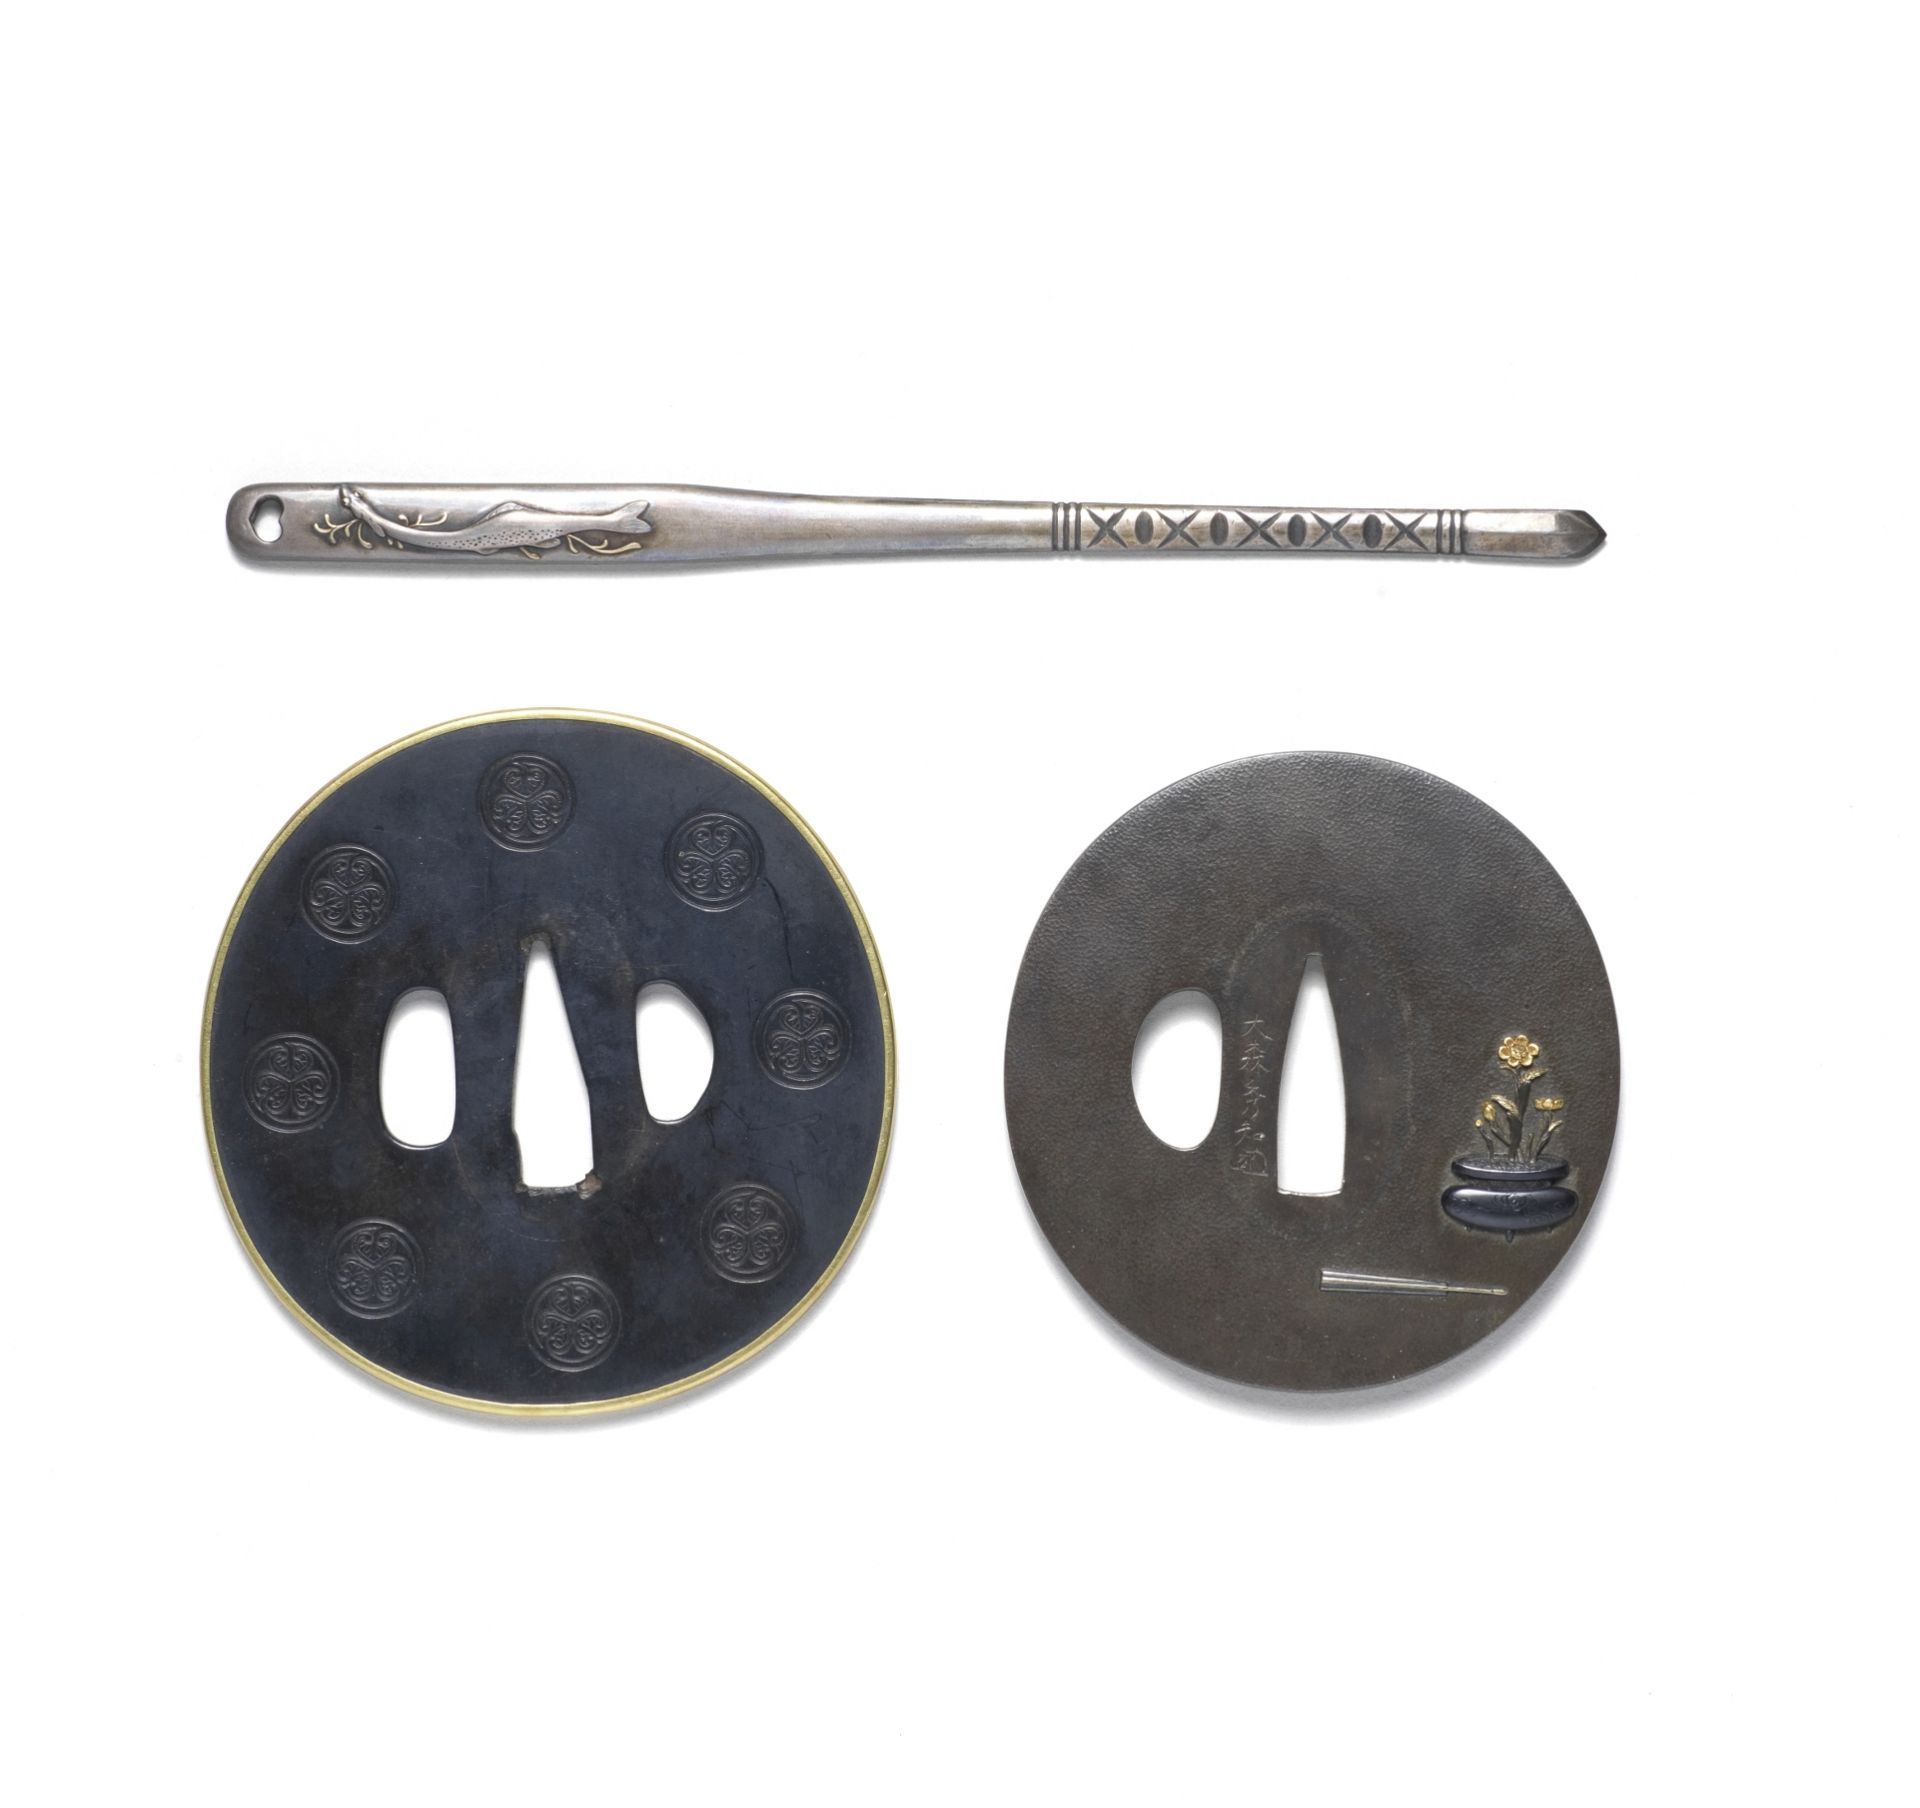 TWO TSUBA (HAND GUARDS) AND A KOGAI (SKEWER) Edo period (1615-1868), early/mid-19th century (3)